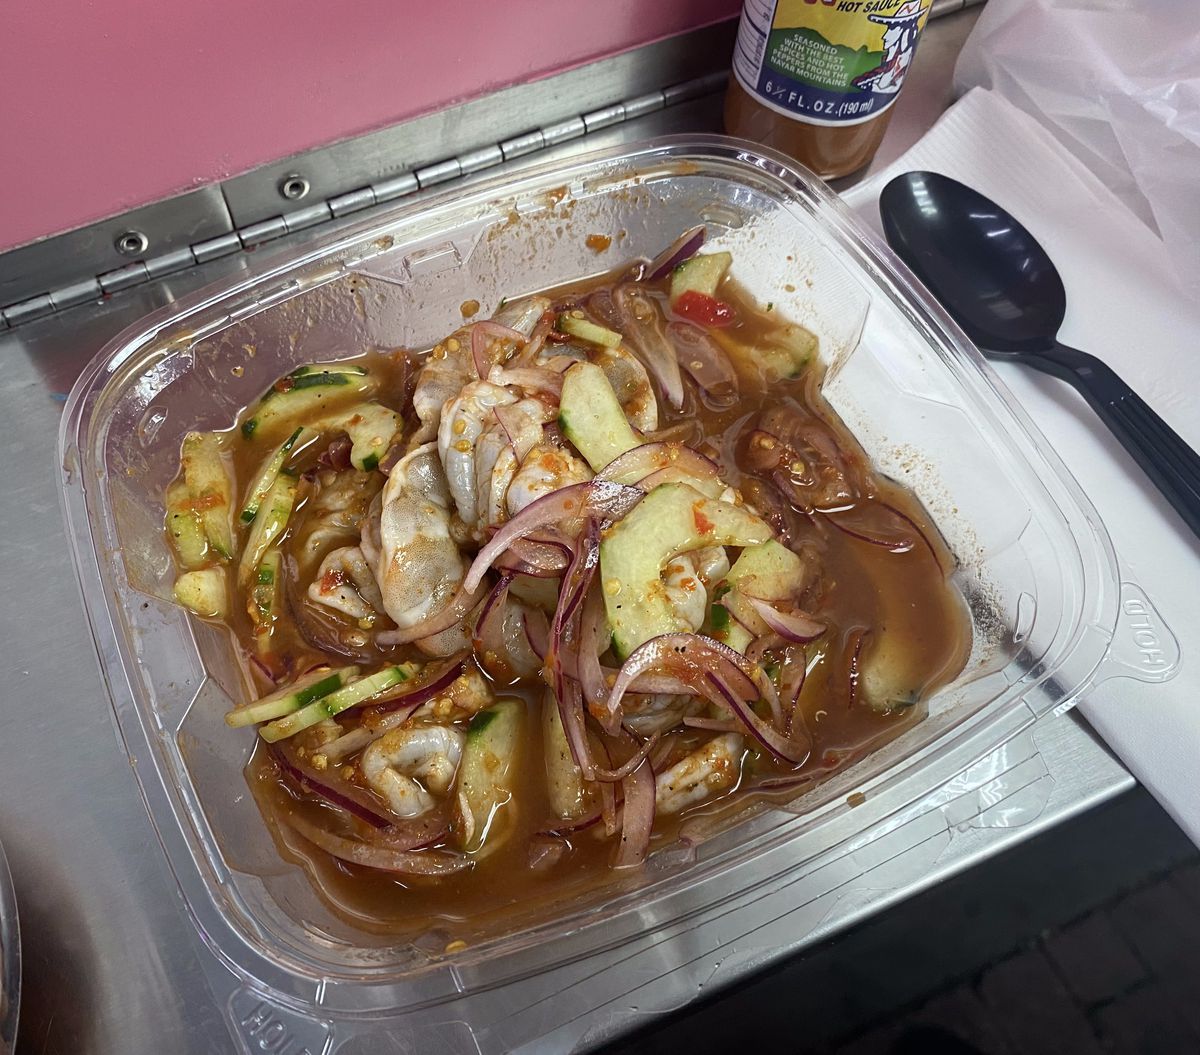 Red juices, red onion, cucumber, and pieces of seafood slosh around in a plastic container.